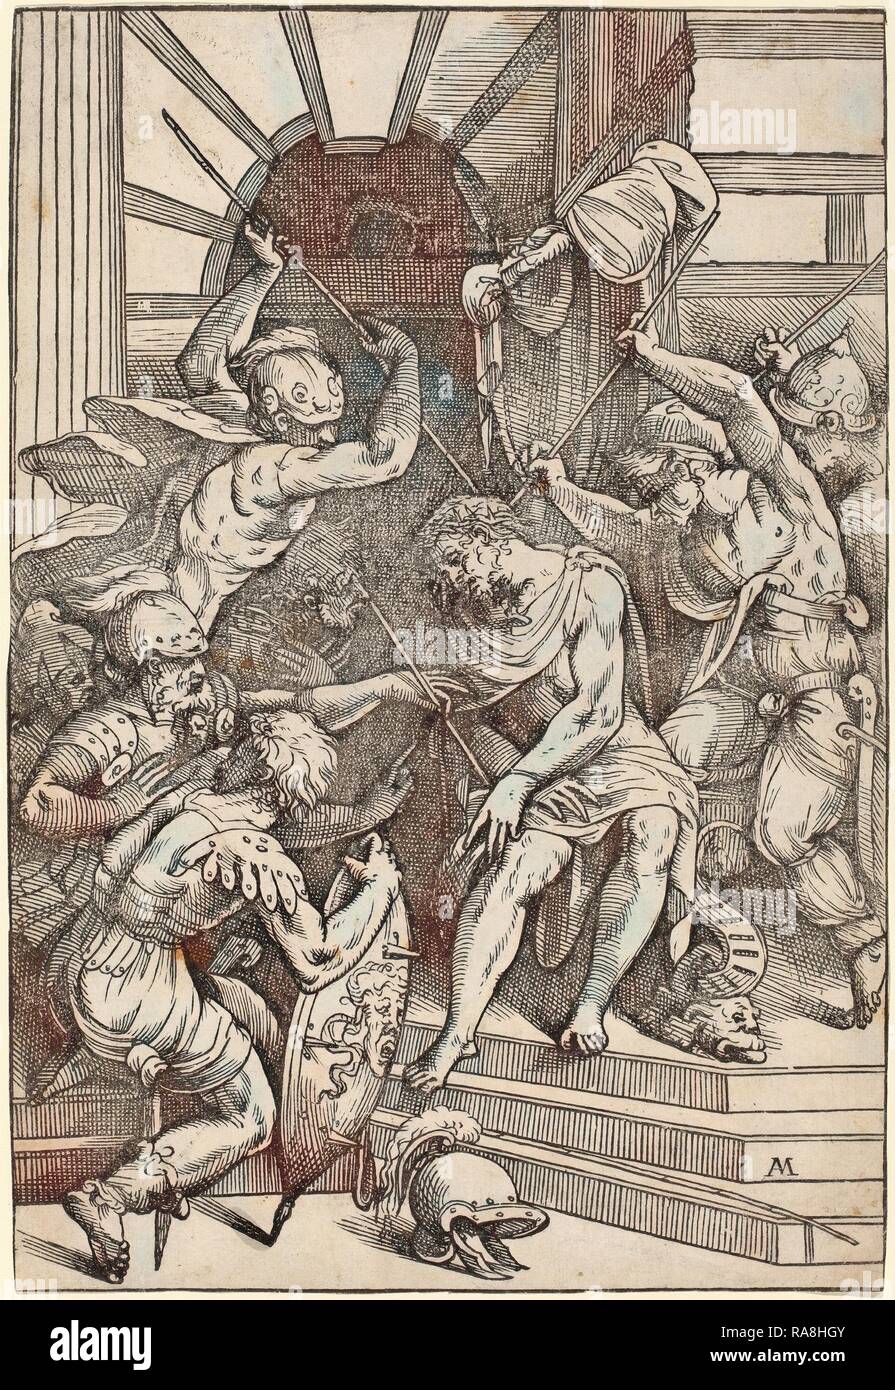 Andrea Schiavone after Titian (Italian, c. 1500 - 1563), Christ Crowned with Thorns, 1550s, woodcut on laid paper reimagined Stock Photo